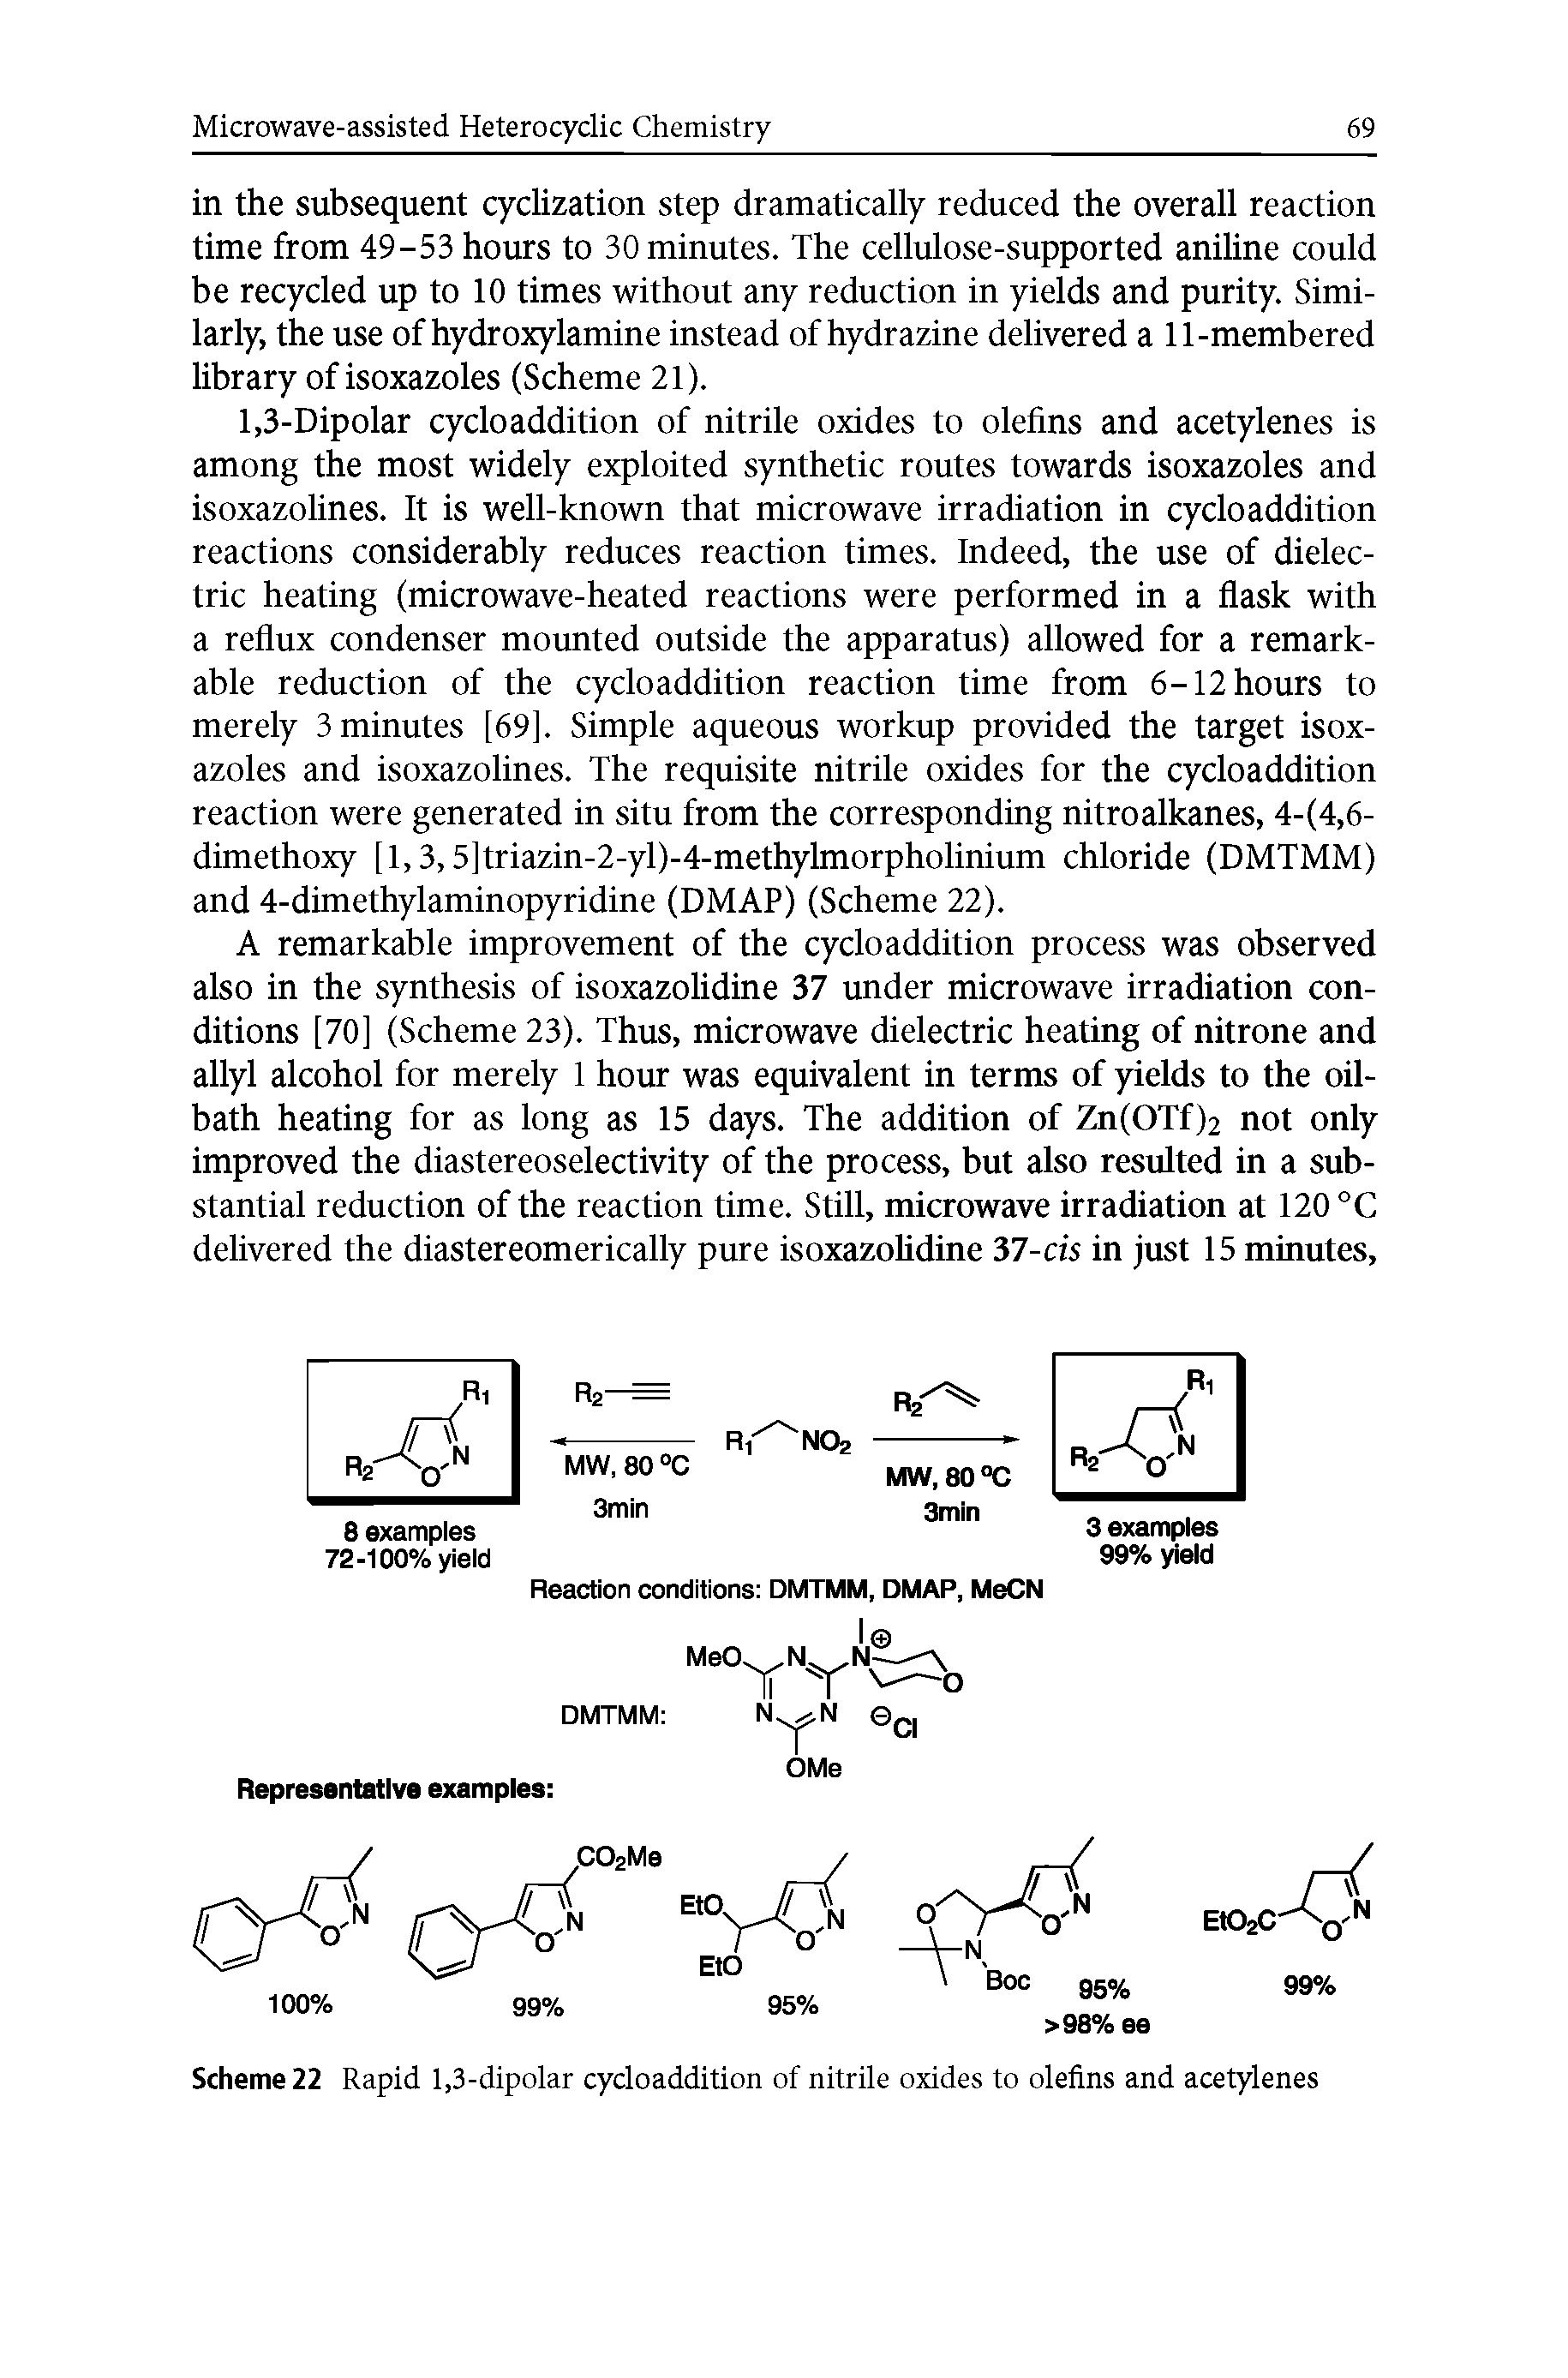 Scheme 22 Rapid 1,3-dipolar cydoaddition of nitrile oxides to olefins and acetylenes...